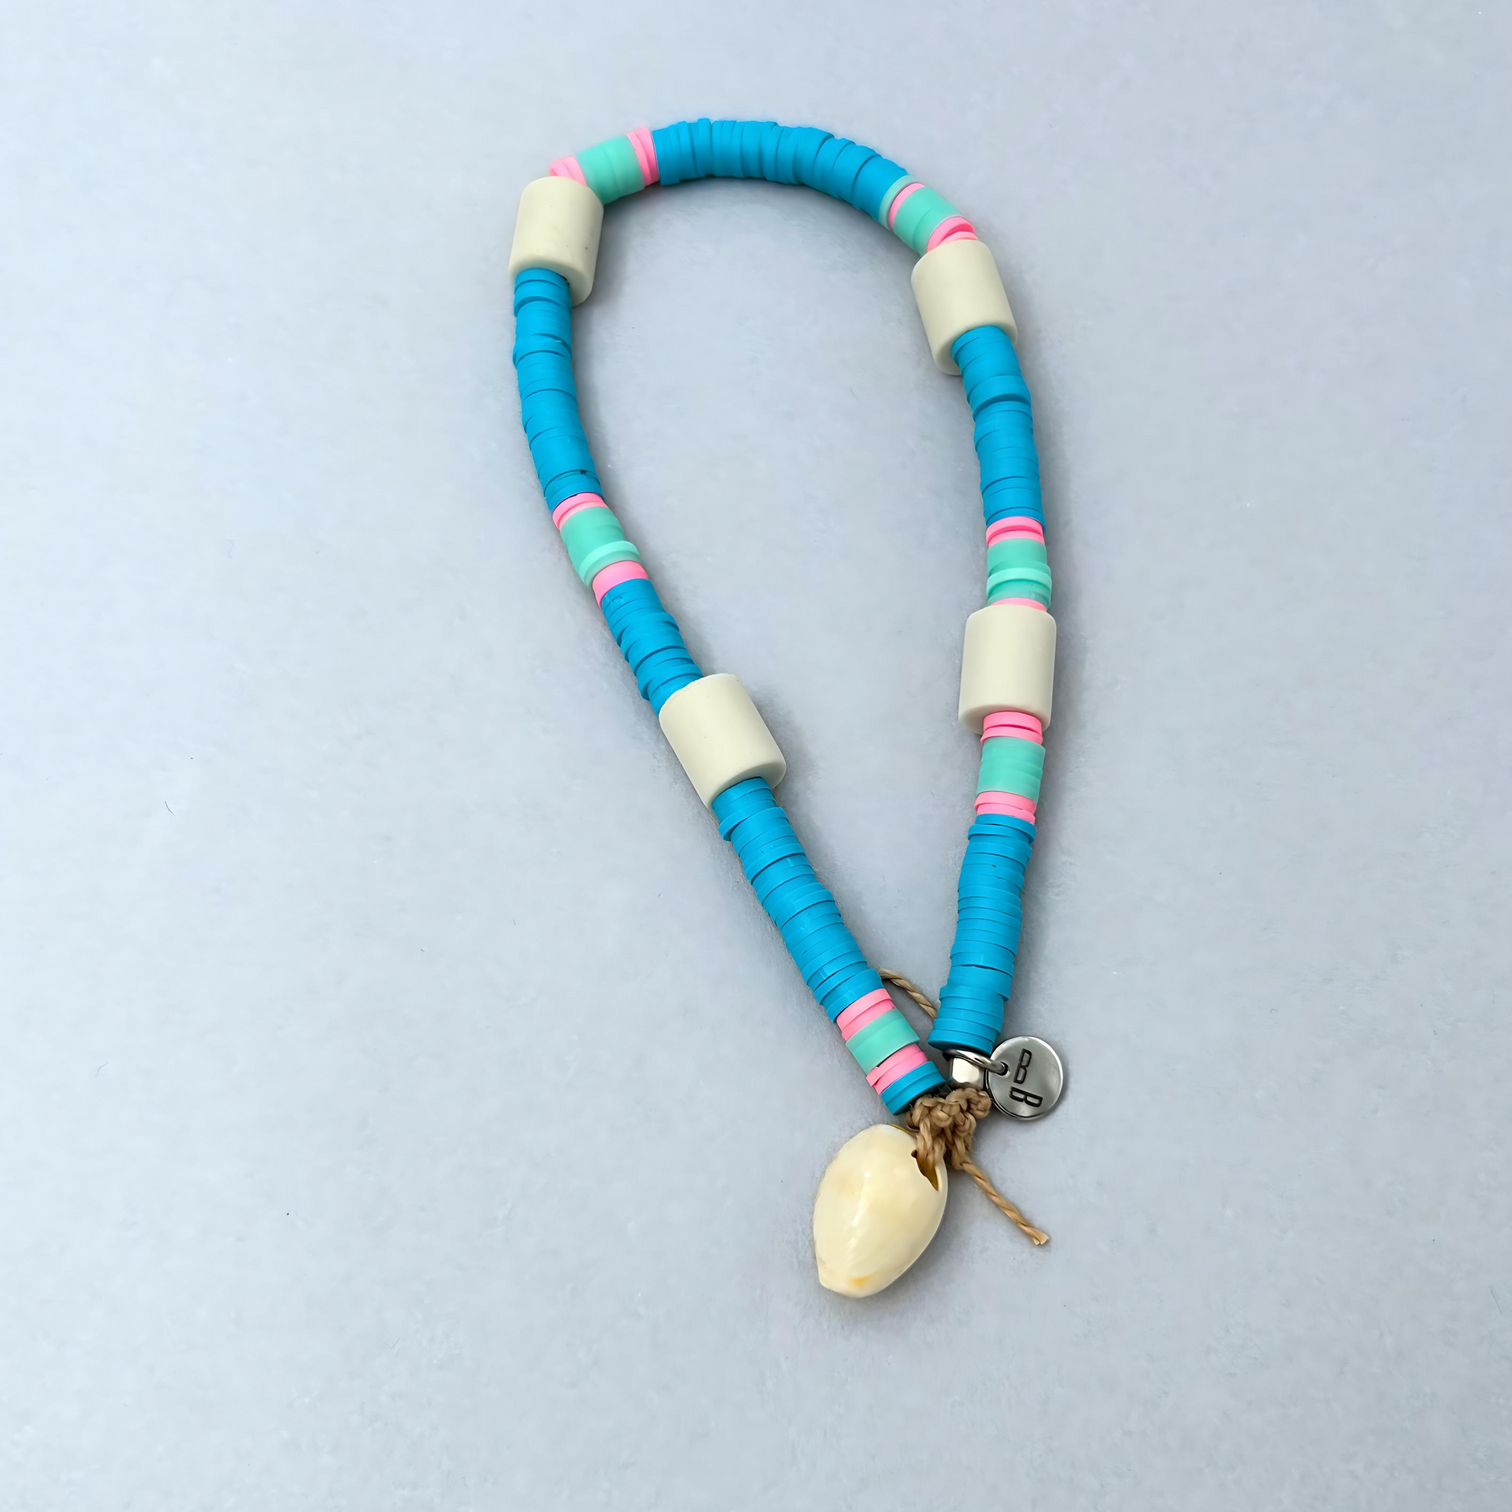 The cool surfer's look anti-tick dog necklace in Galaxiy Blue_wow by Le BijouBijou